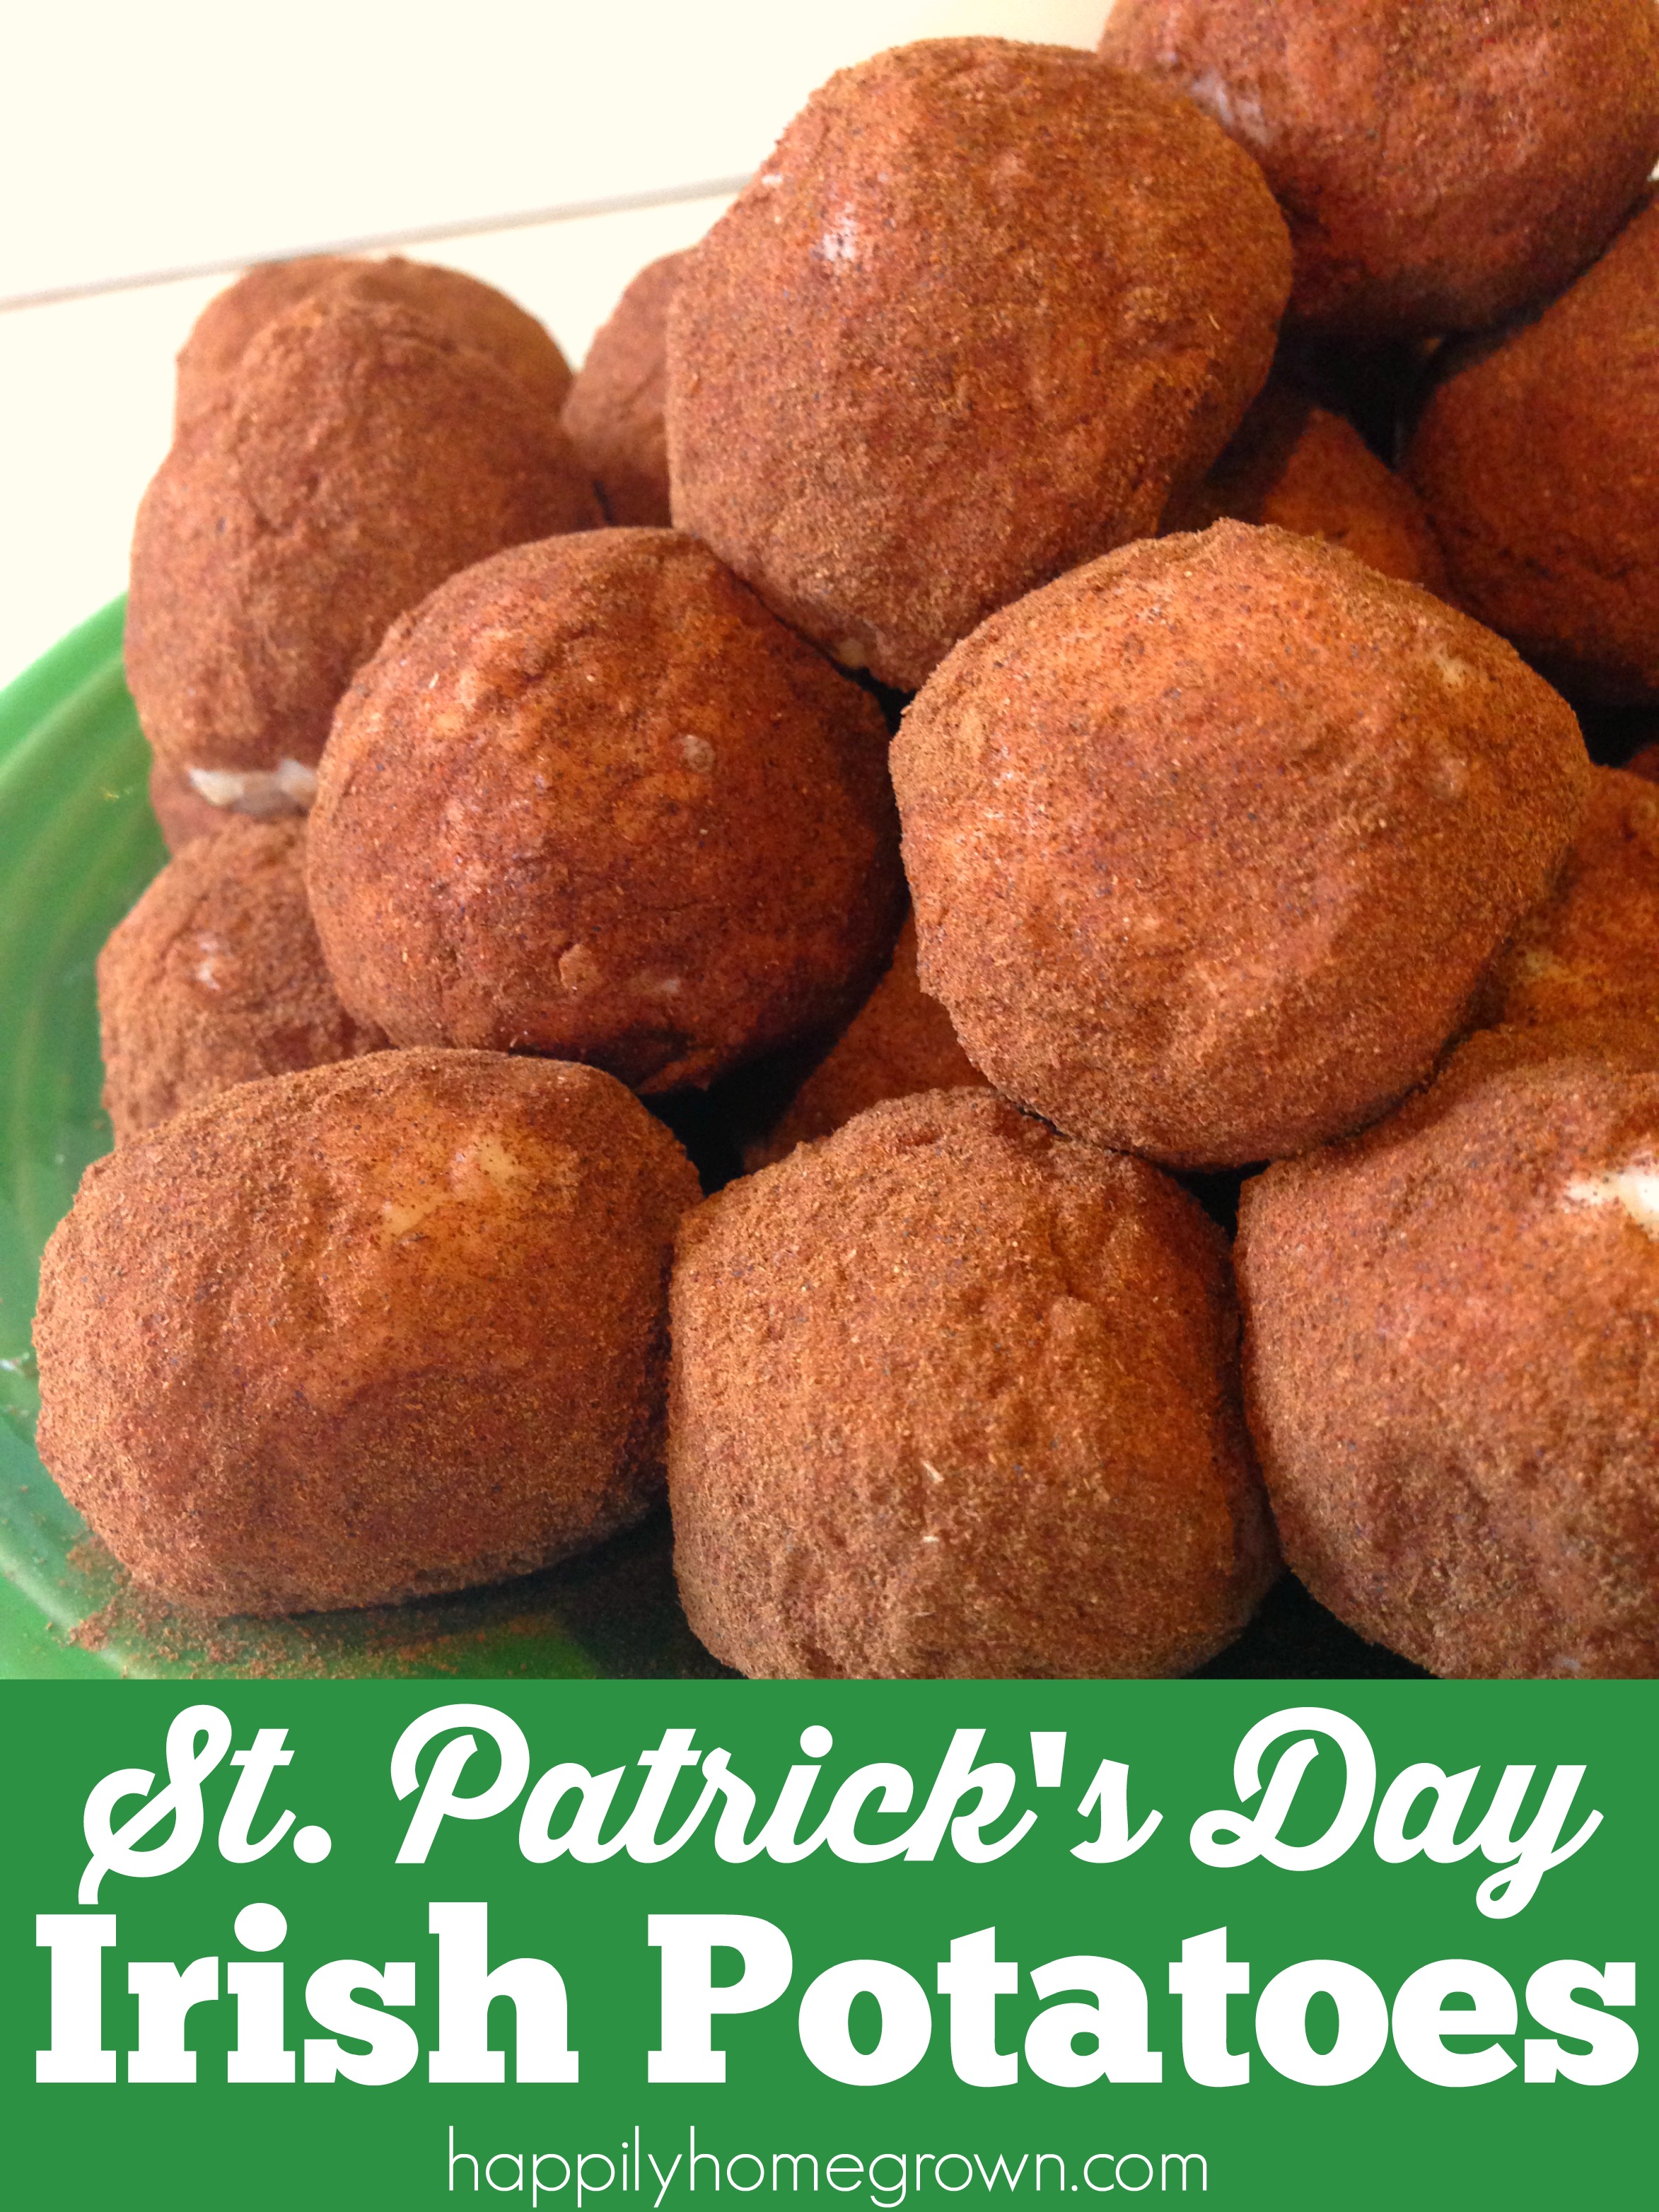 Irish Potatoes have very little to actually do with potatoes; potatoes aren't even an ingredient! However, these bite size confections look like petite russet potatoes.